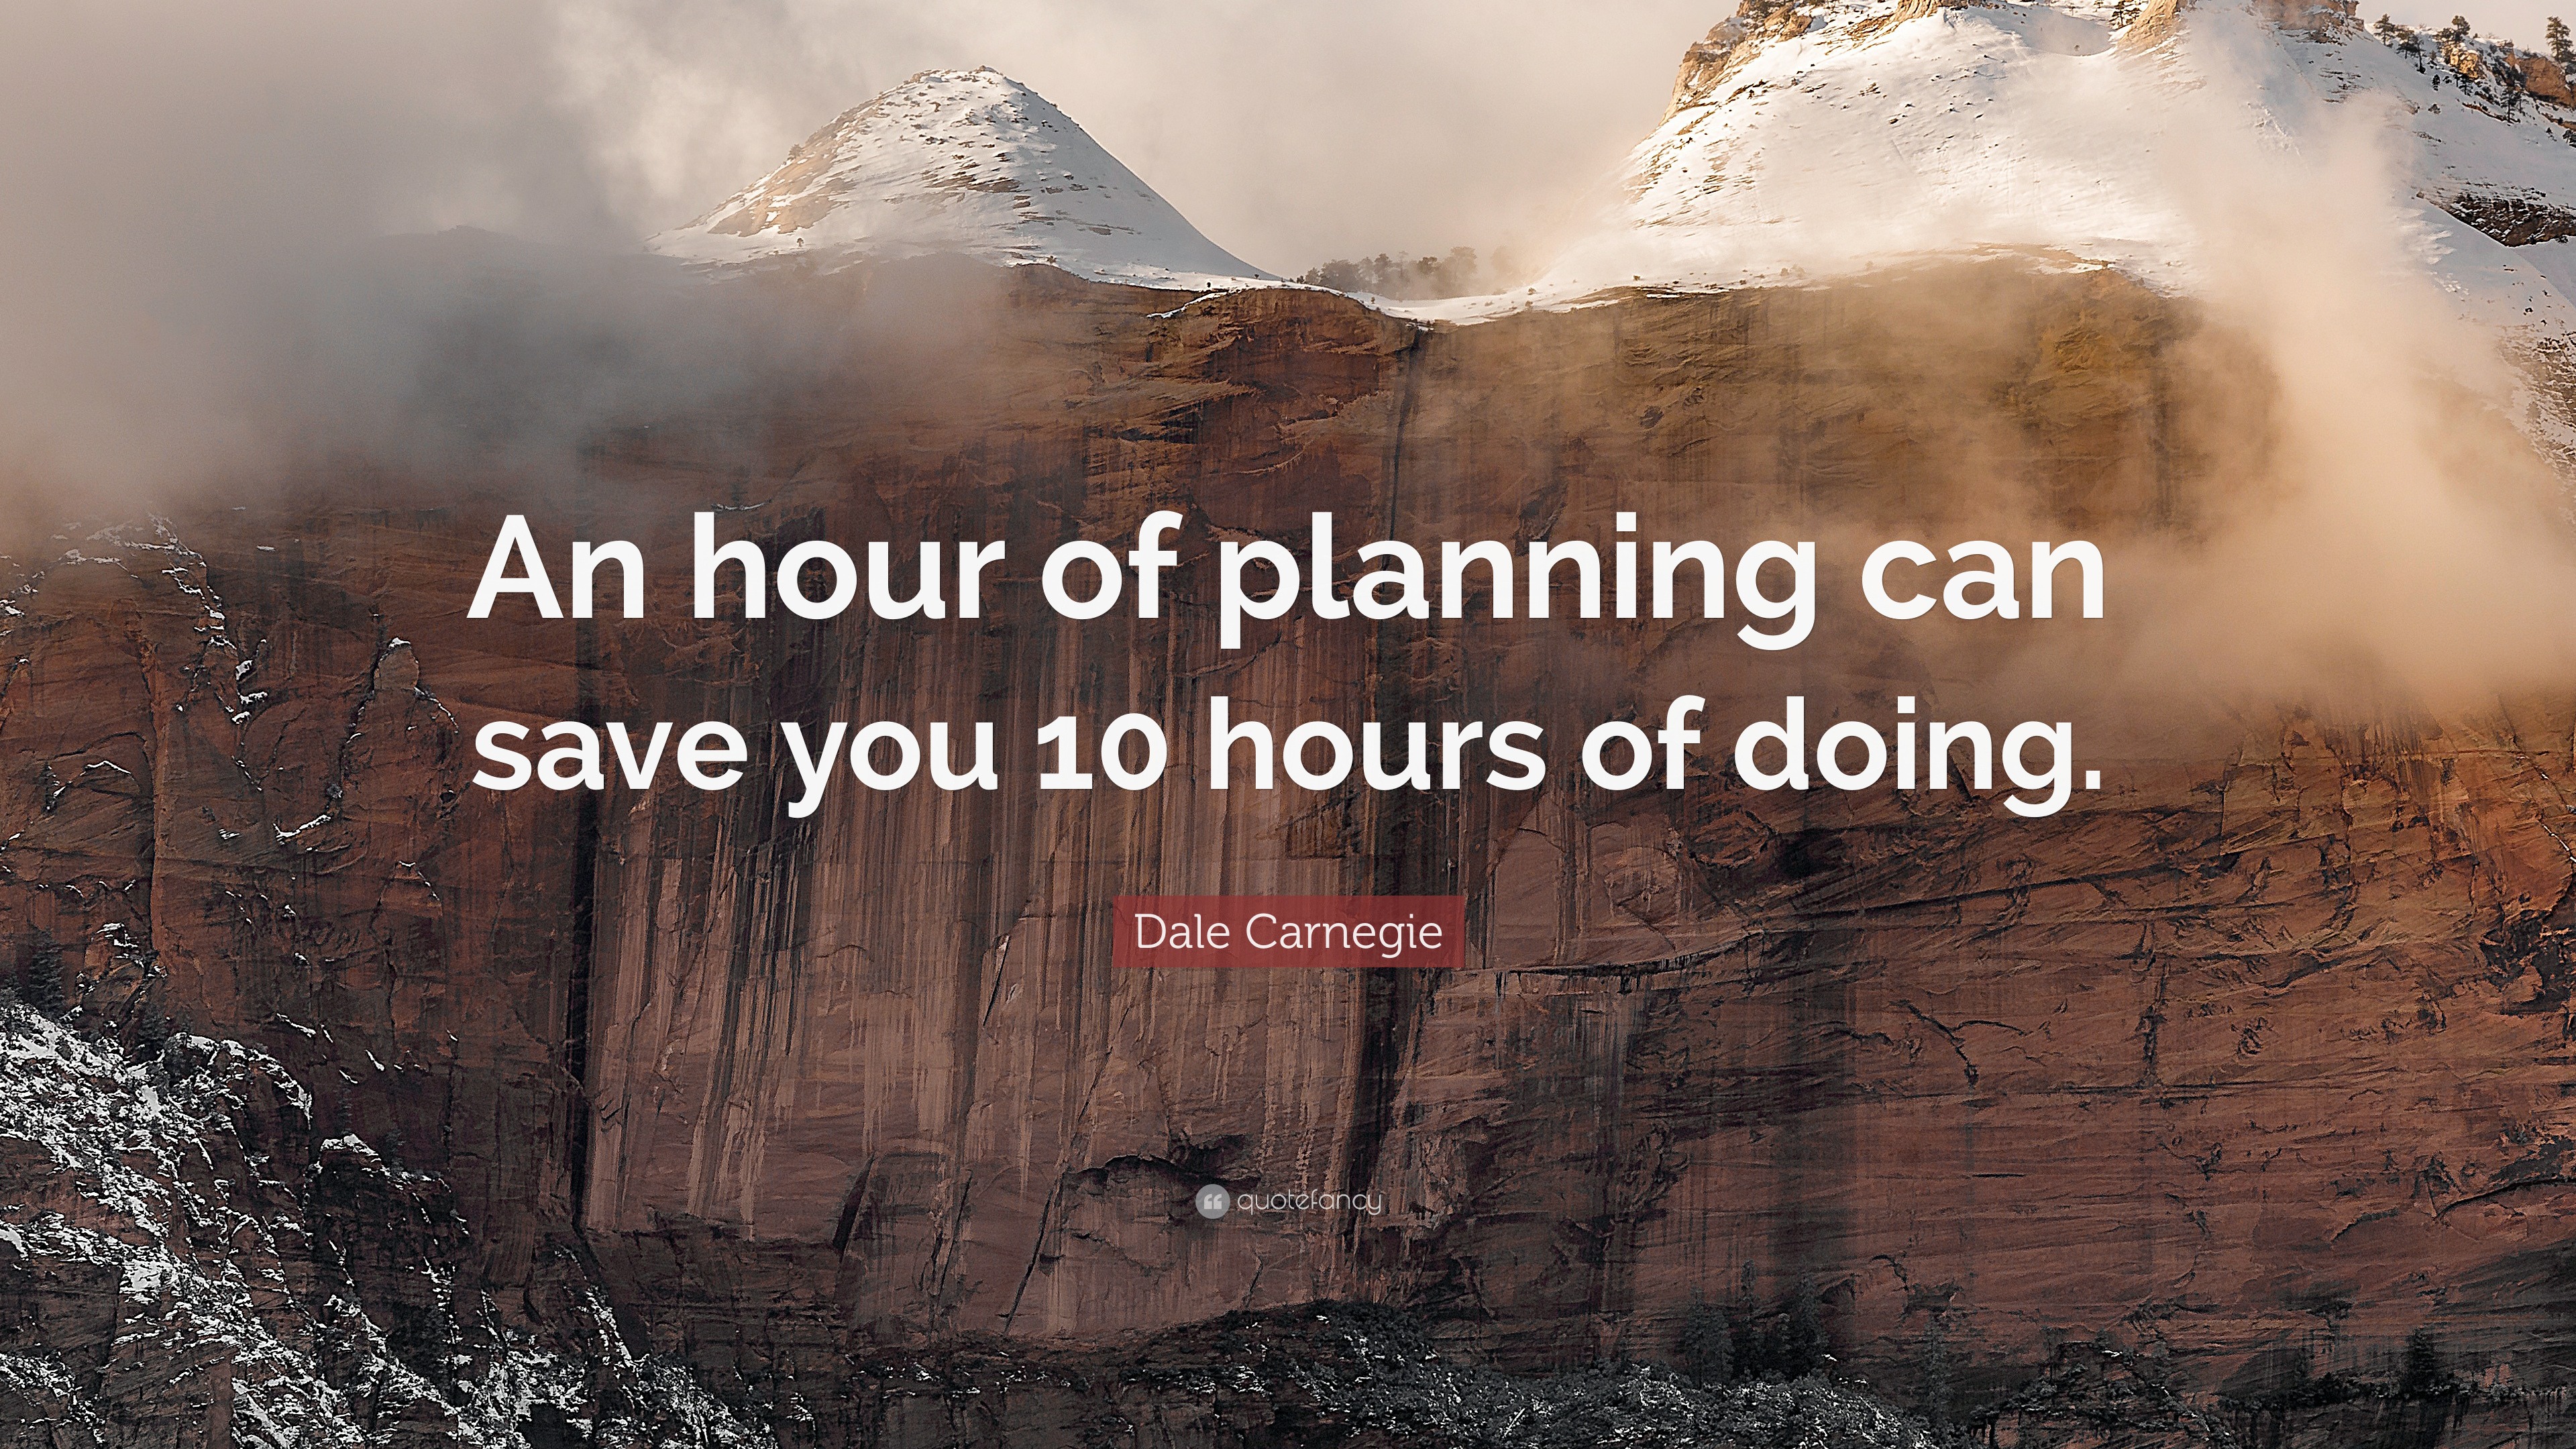 Dale Carnegie Quote “An hour of planning can save you 10